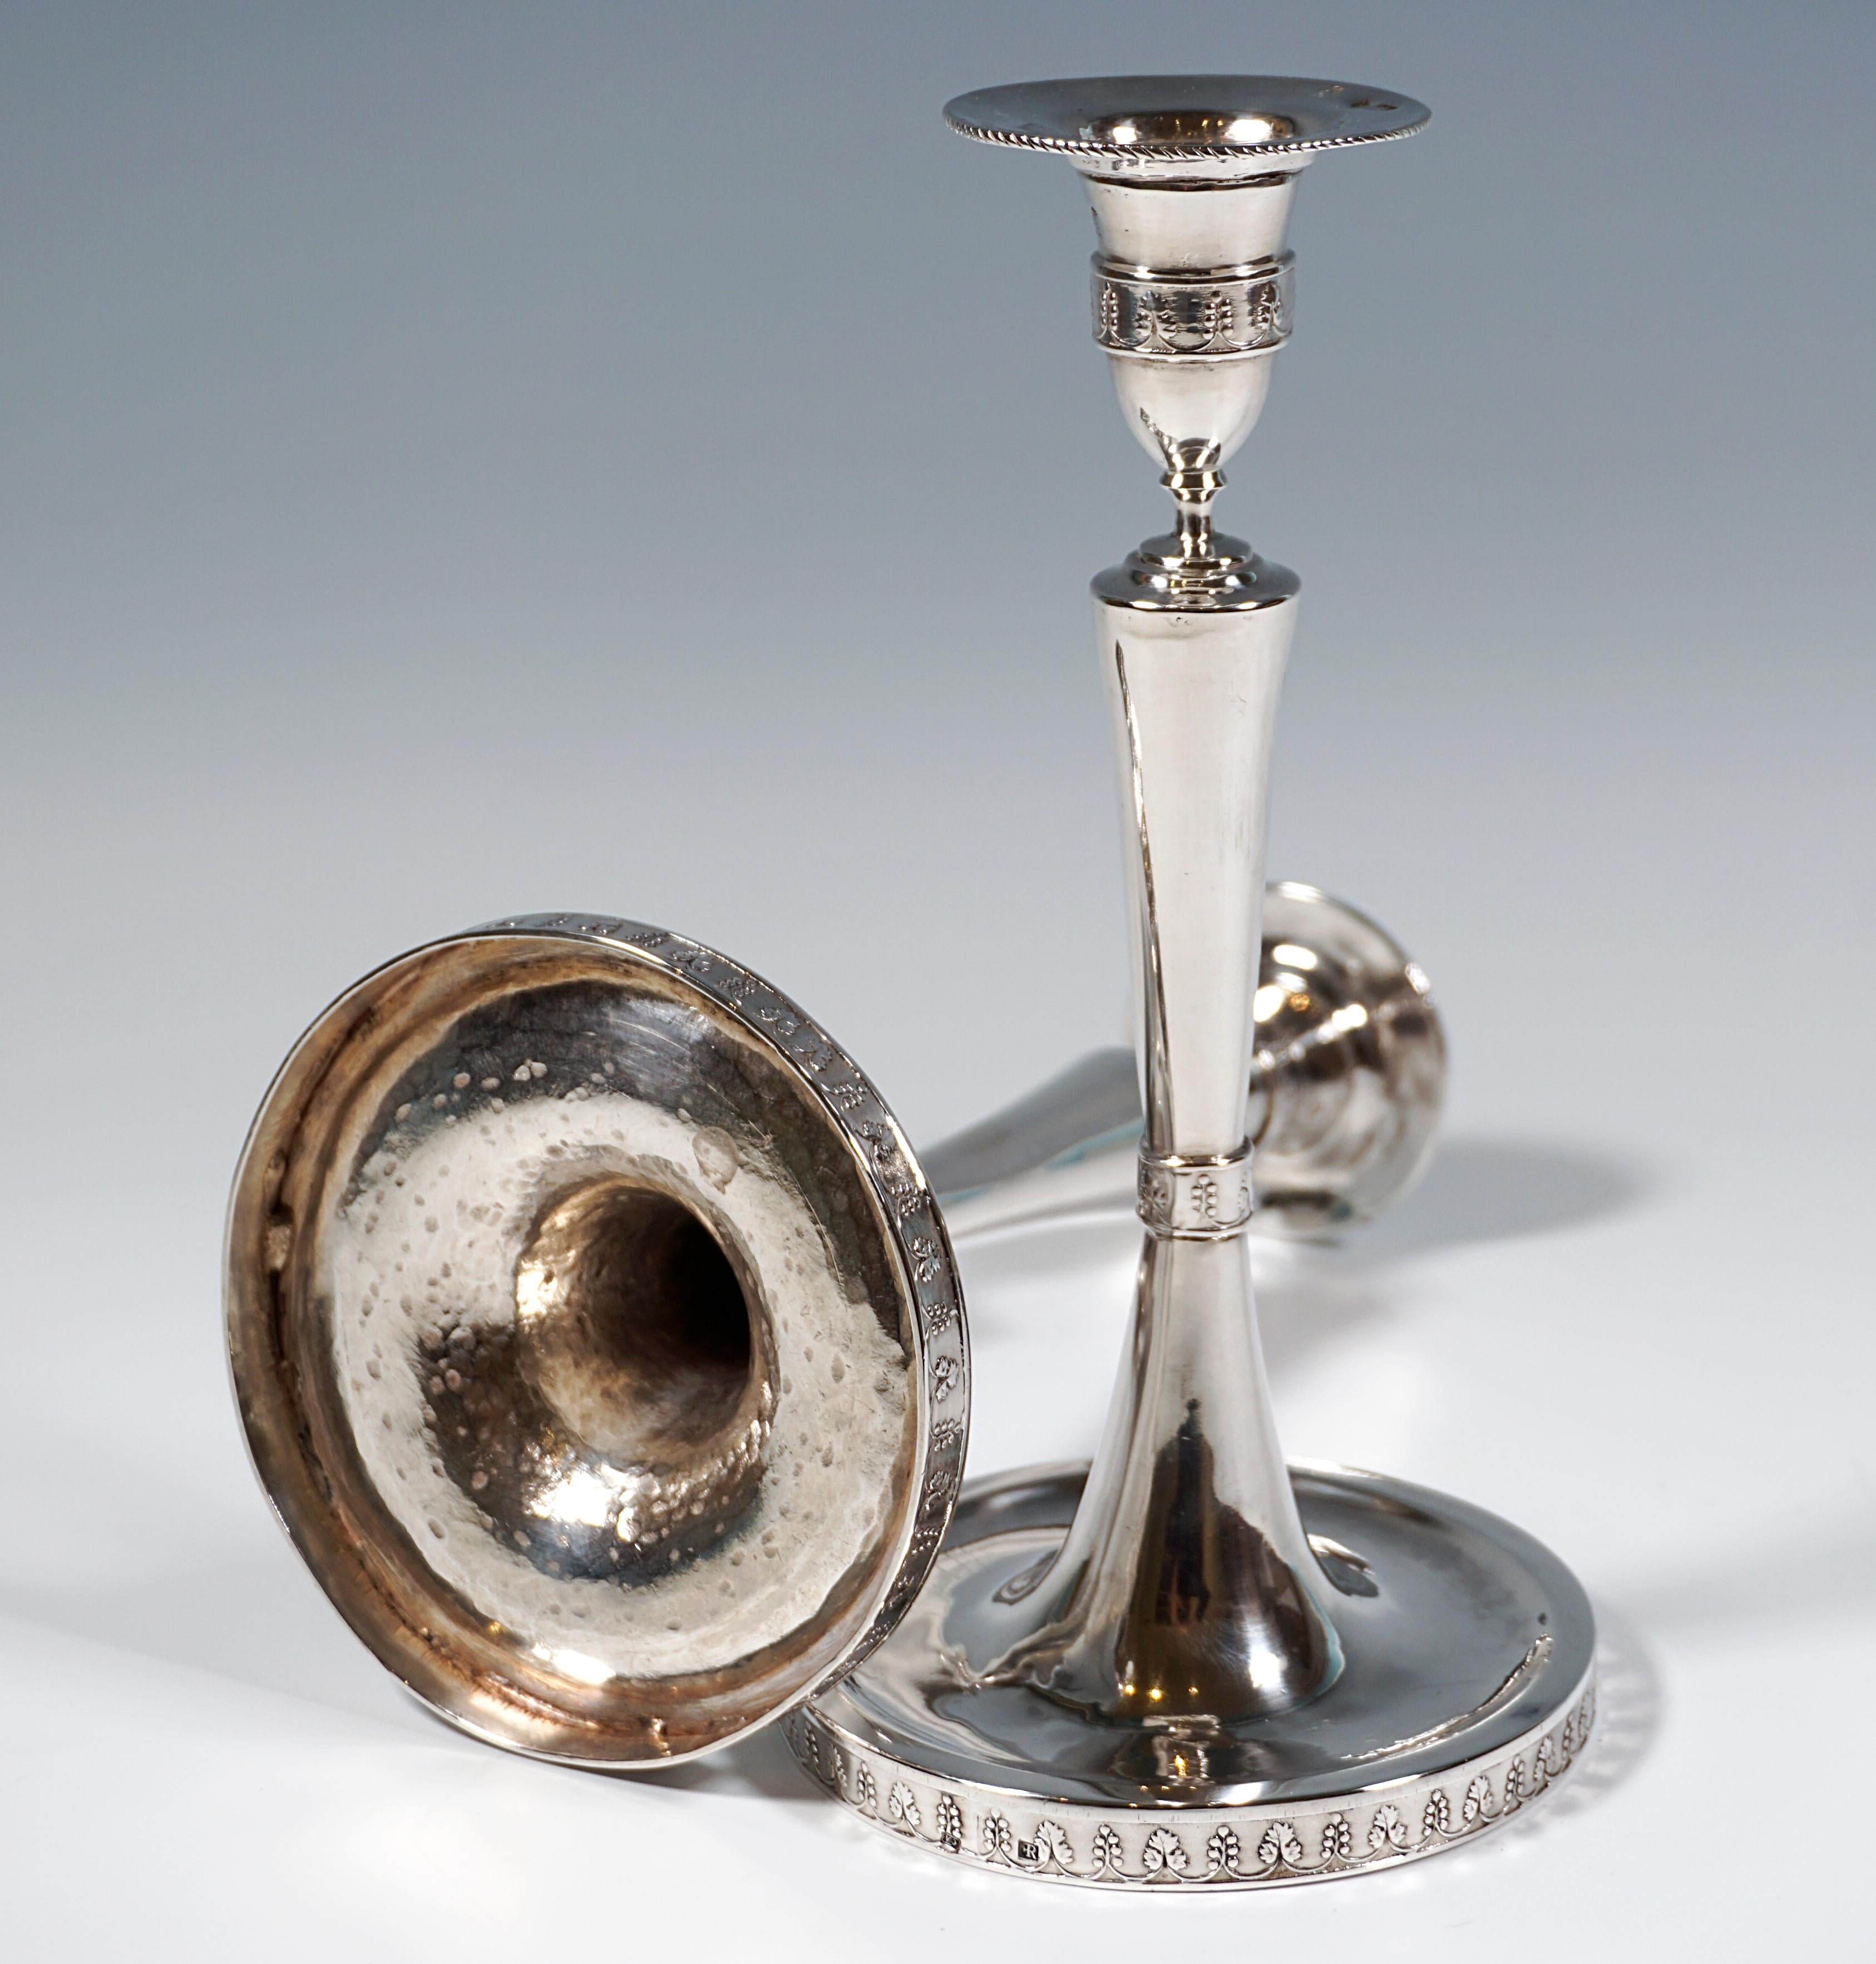 Pair Of Antique Empire Silver Candle Holders, Johann Kaba Vienna, Dated 1803 For Sale 1